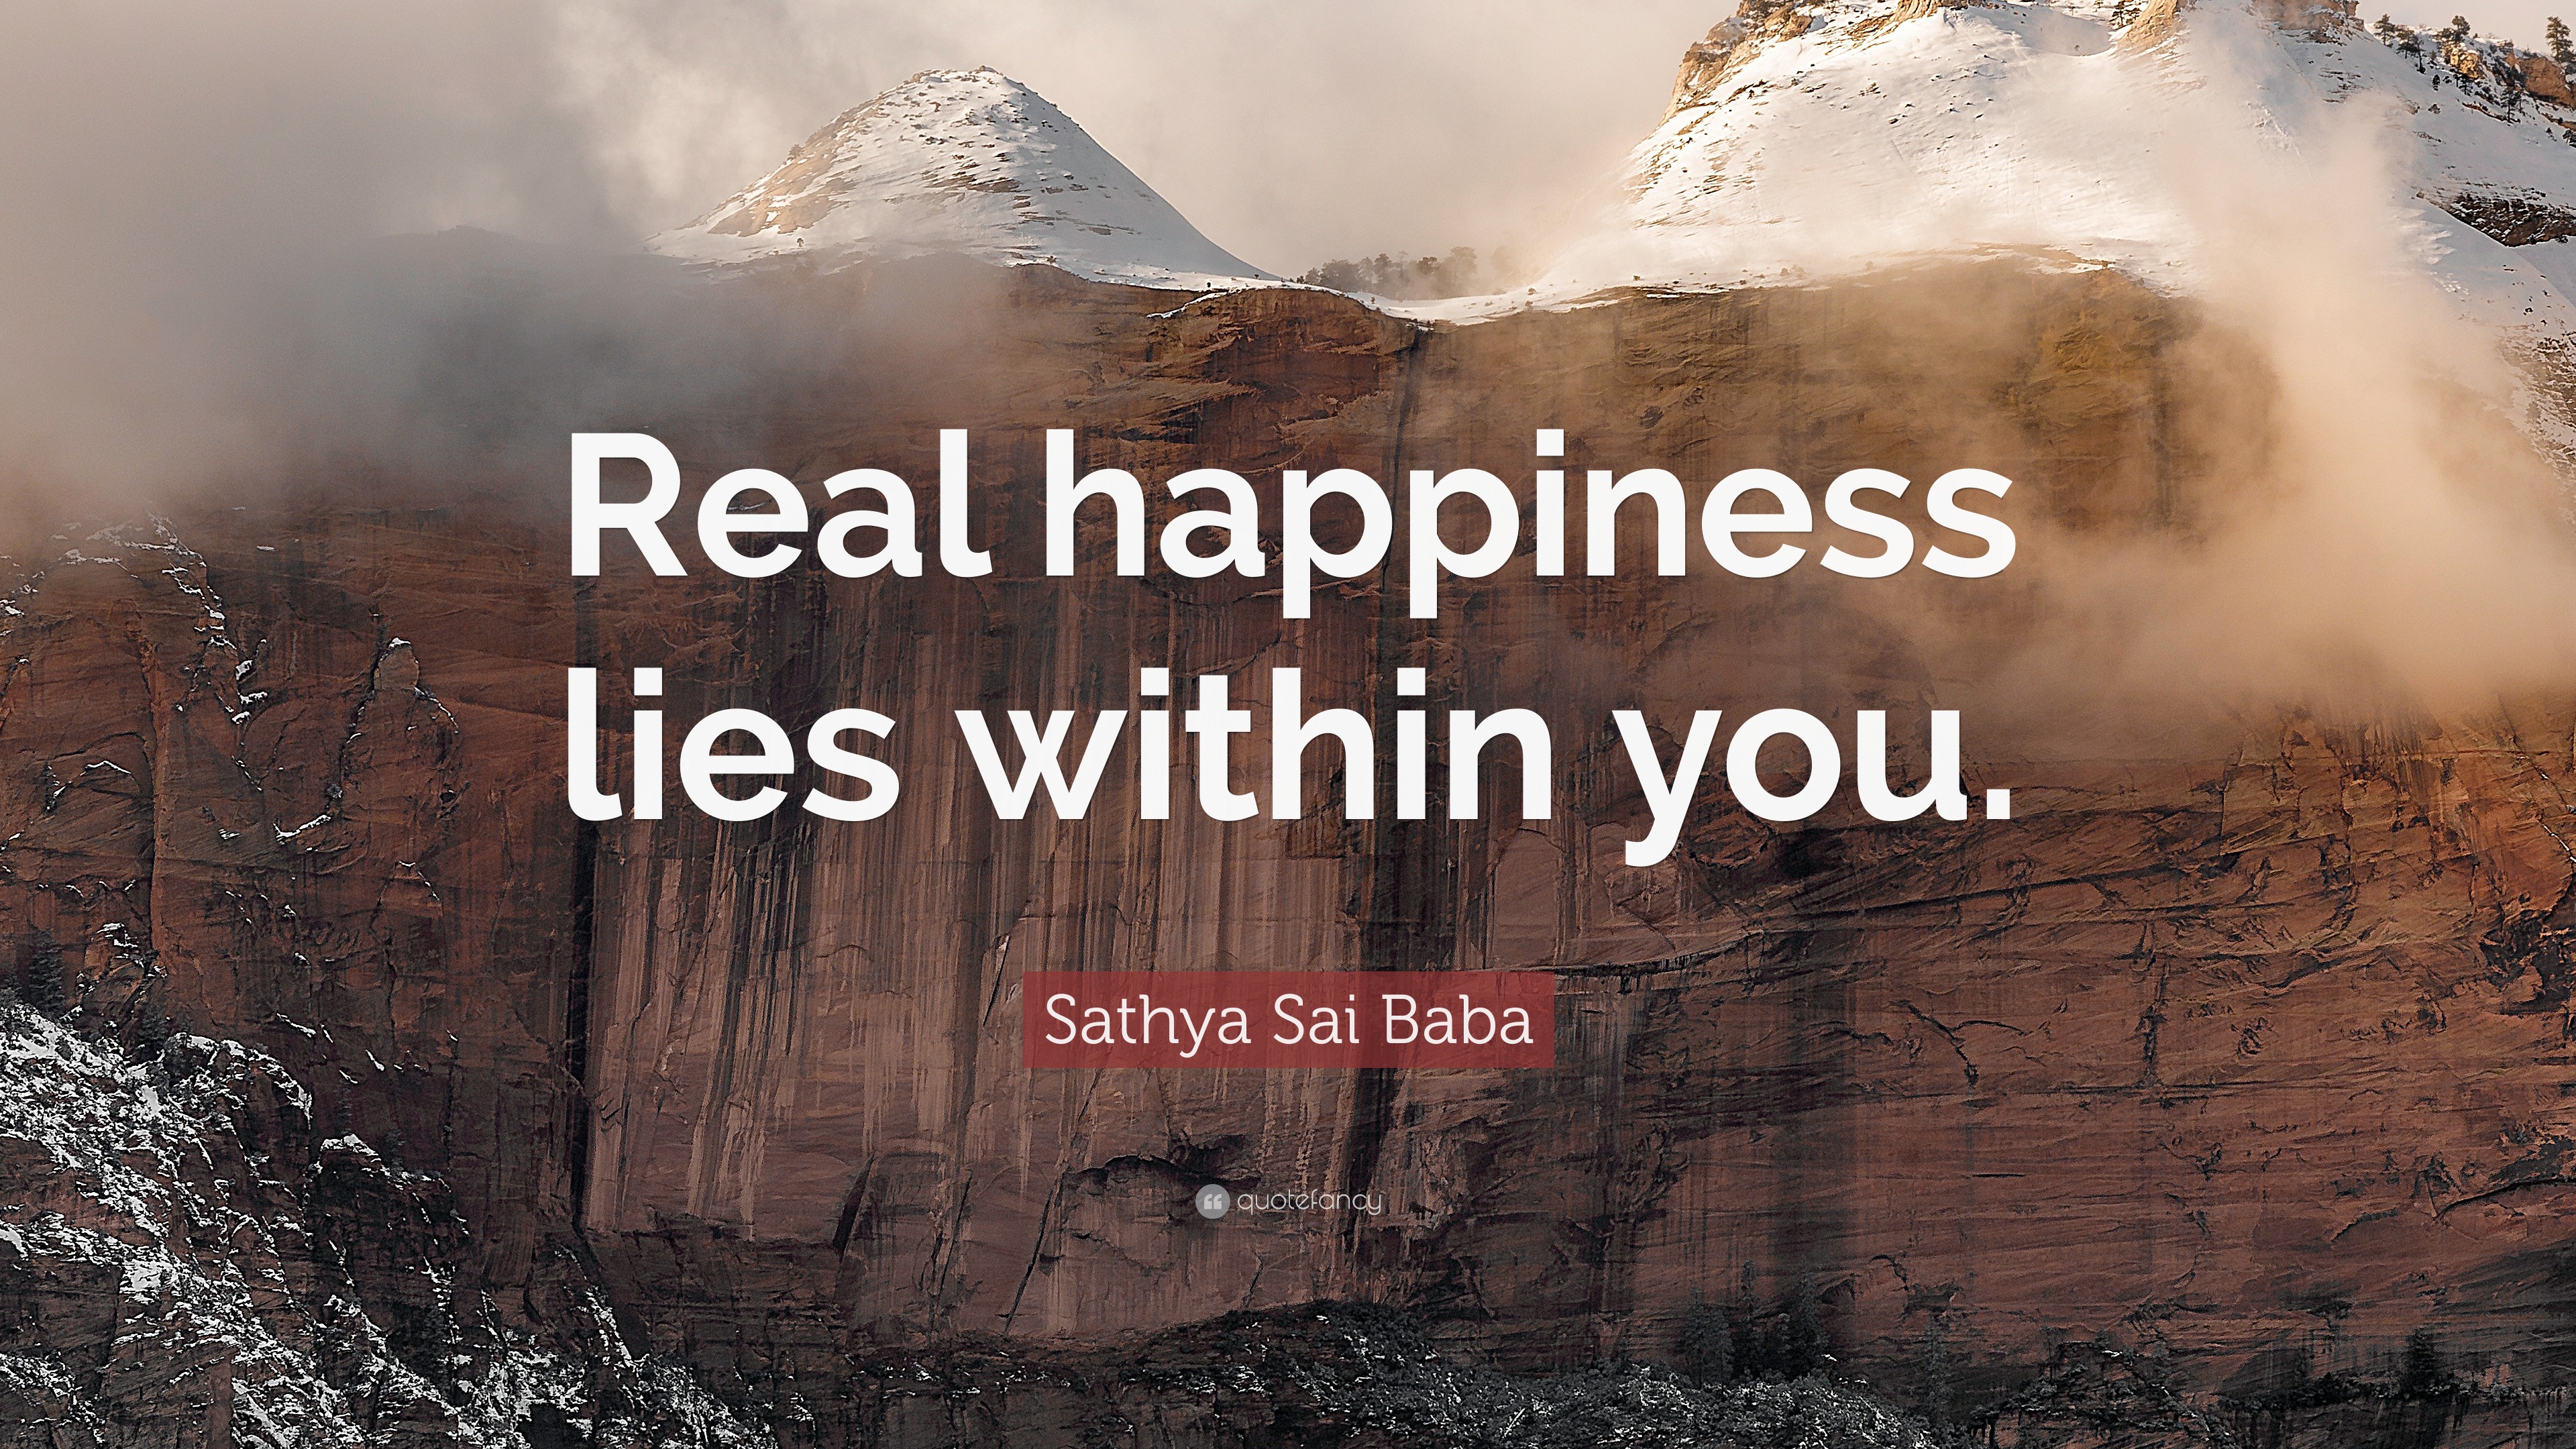 Sathya Sai Baba Quote: "Real happiness lies within you ...